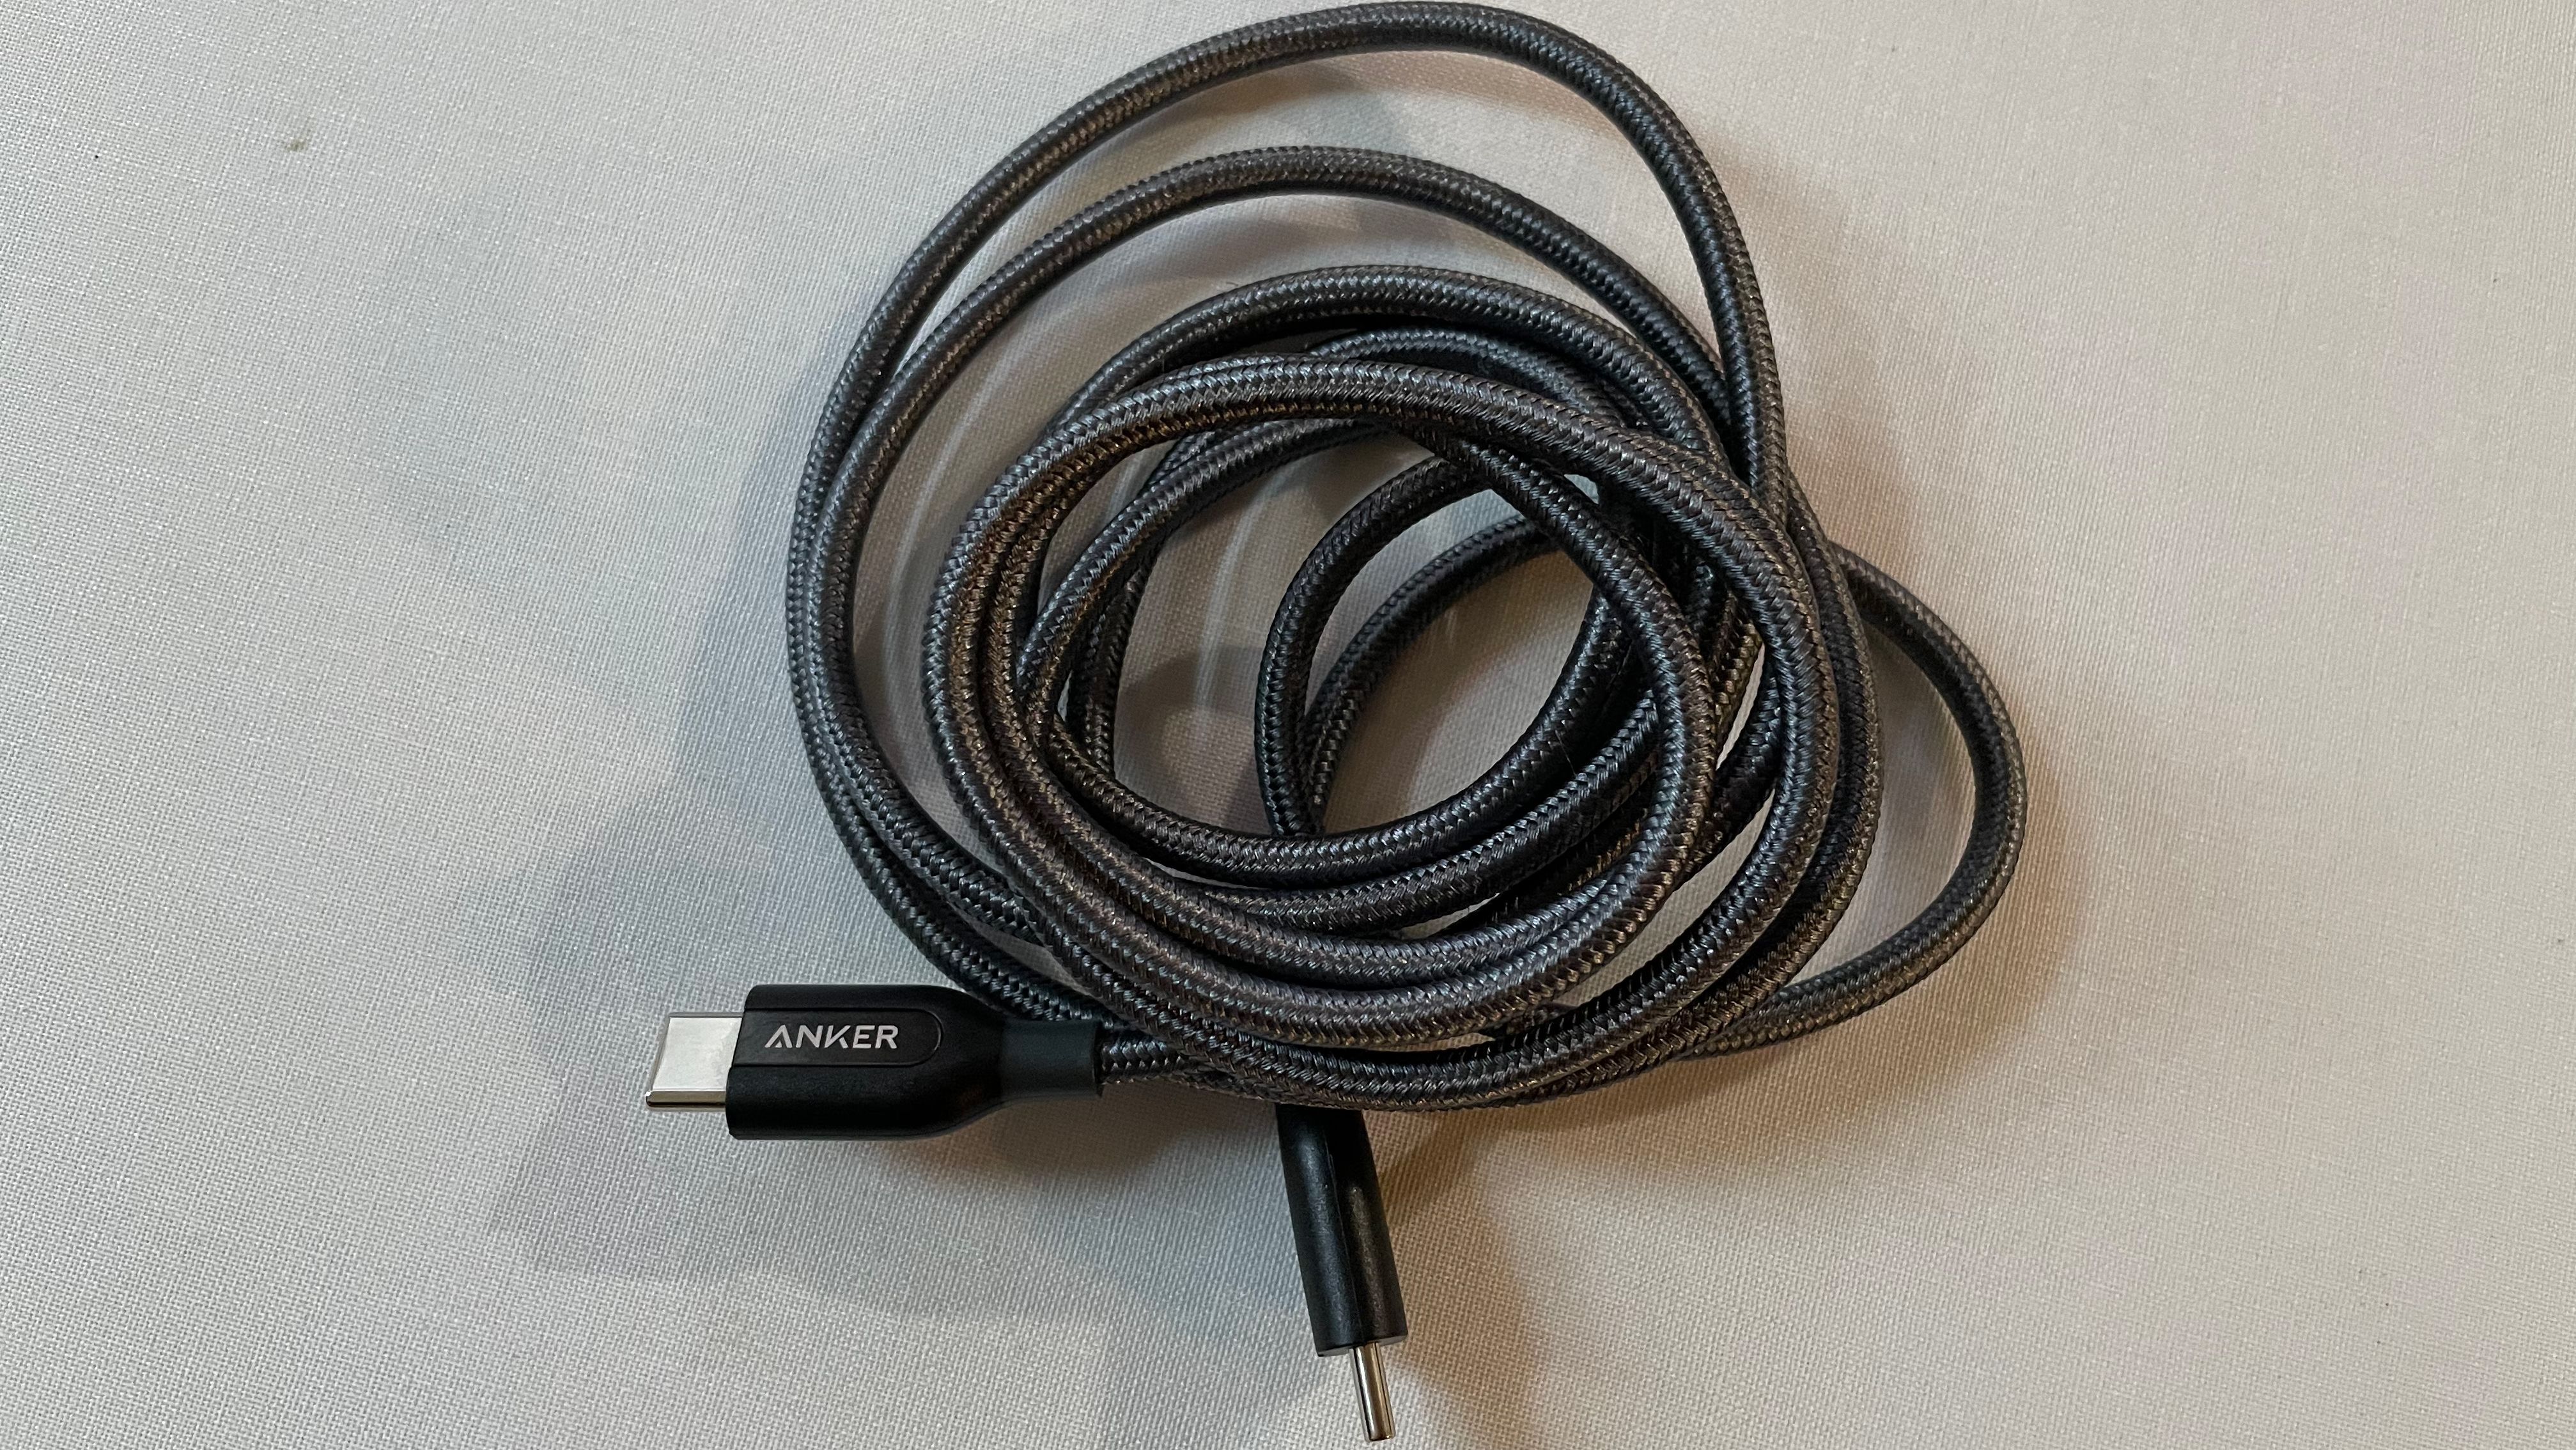 Quick Guide to Buying USB-C Cables